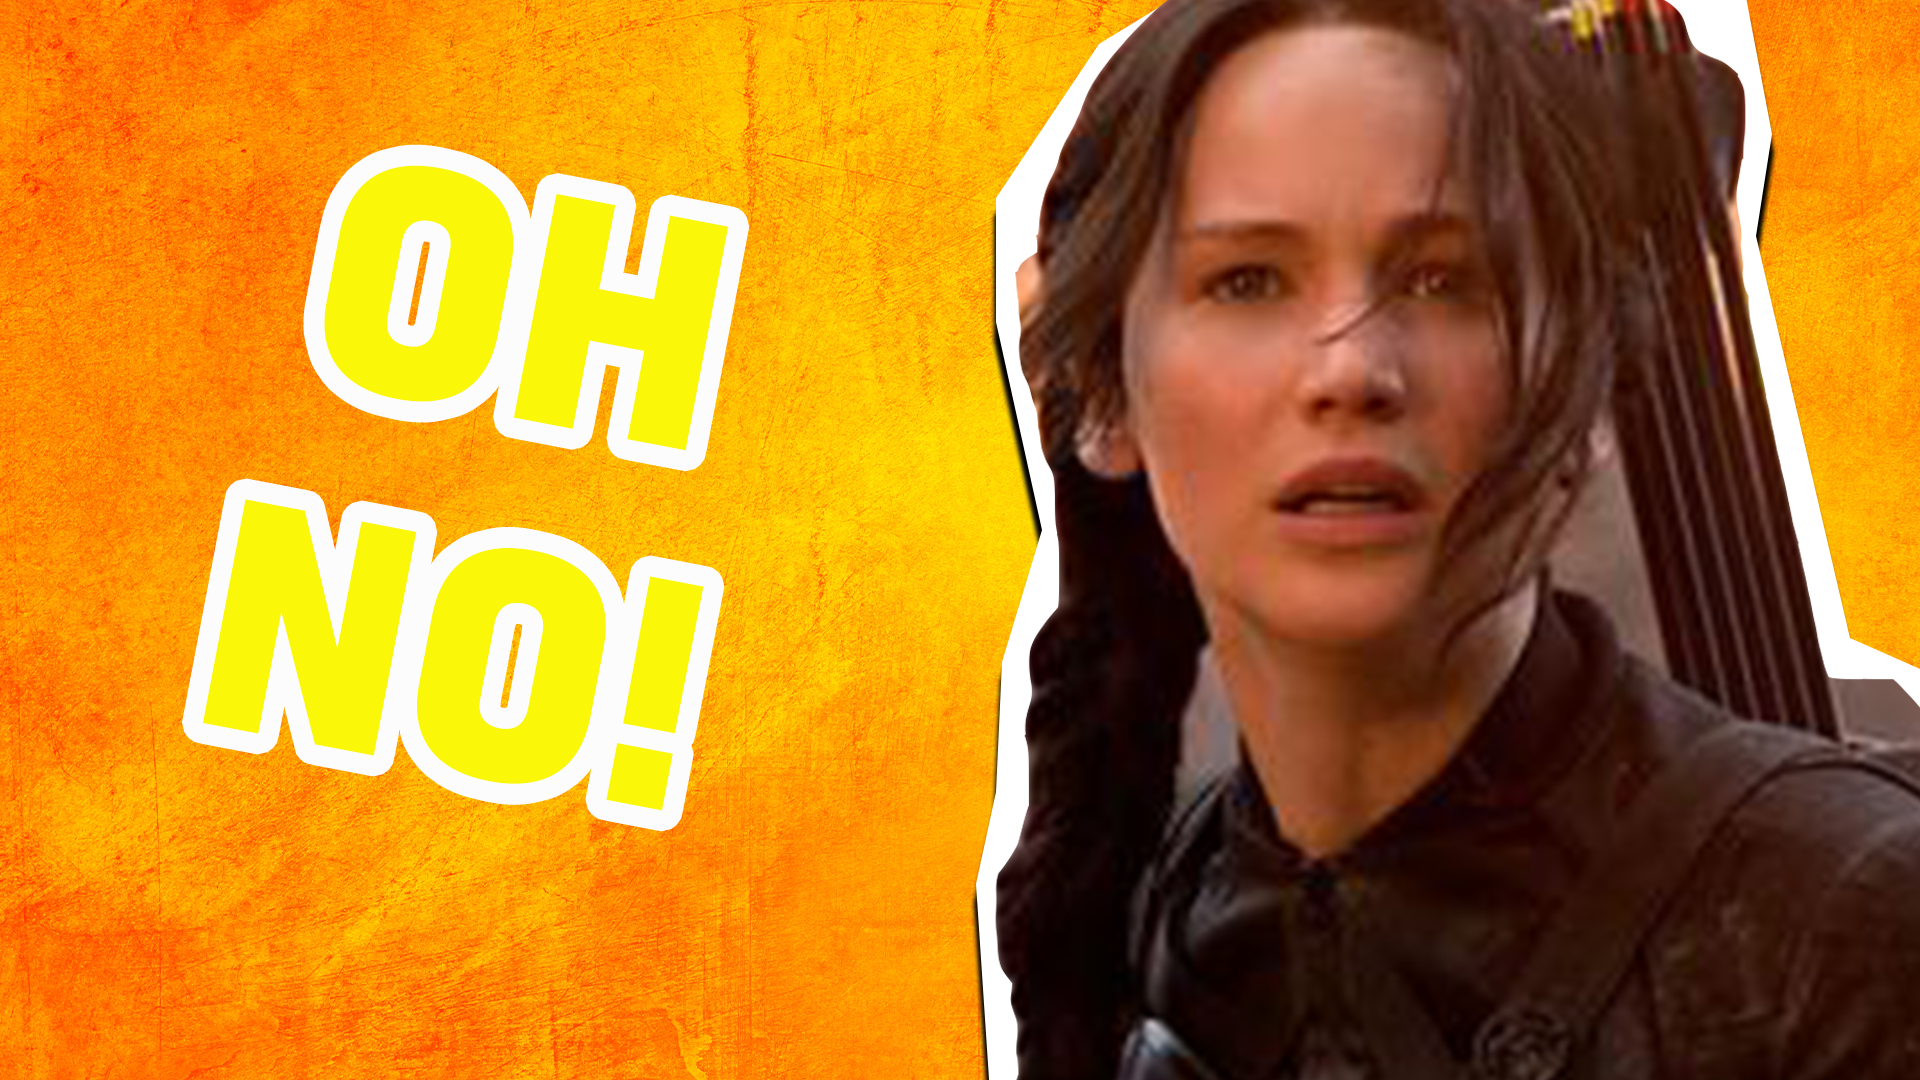 Oh noooo! Looks like you didn't survive the Hunger Games! Or at least, you didn't survive this quiz, because you got 0/10!